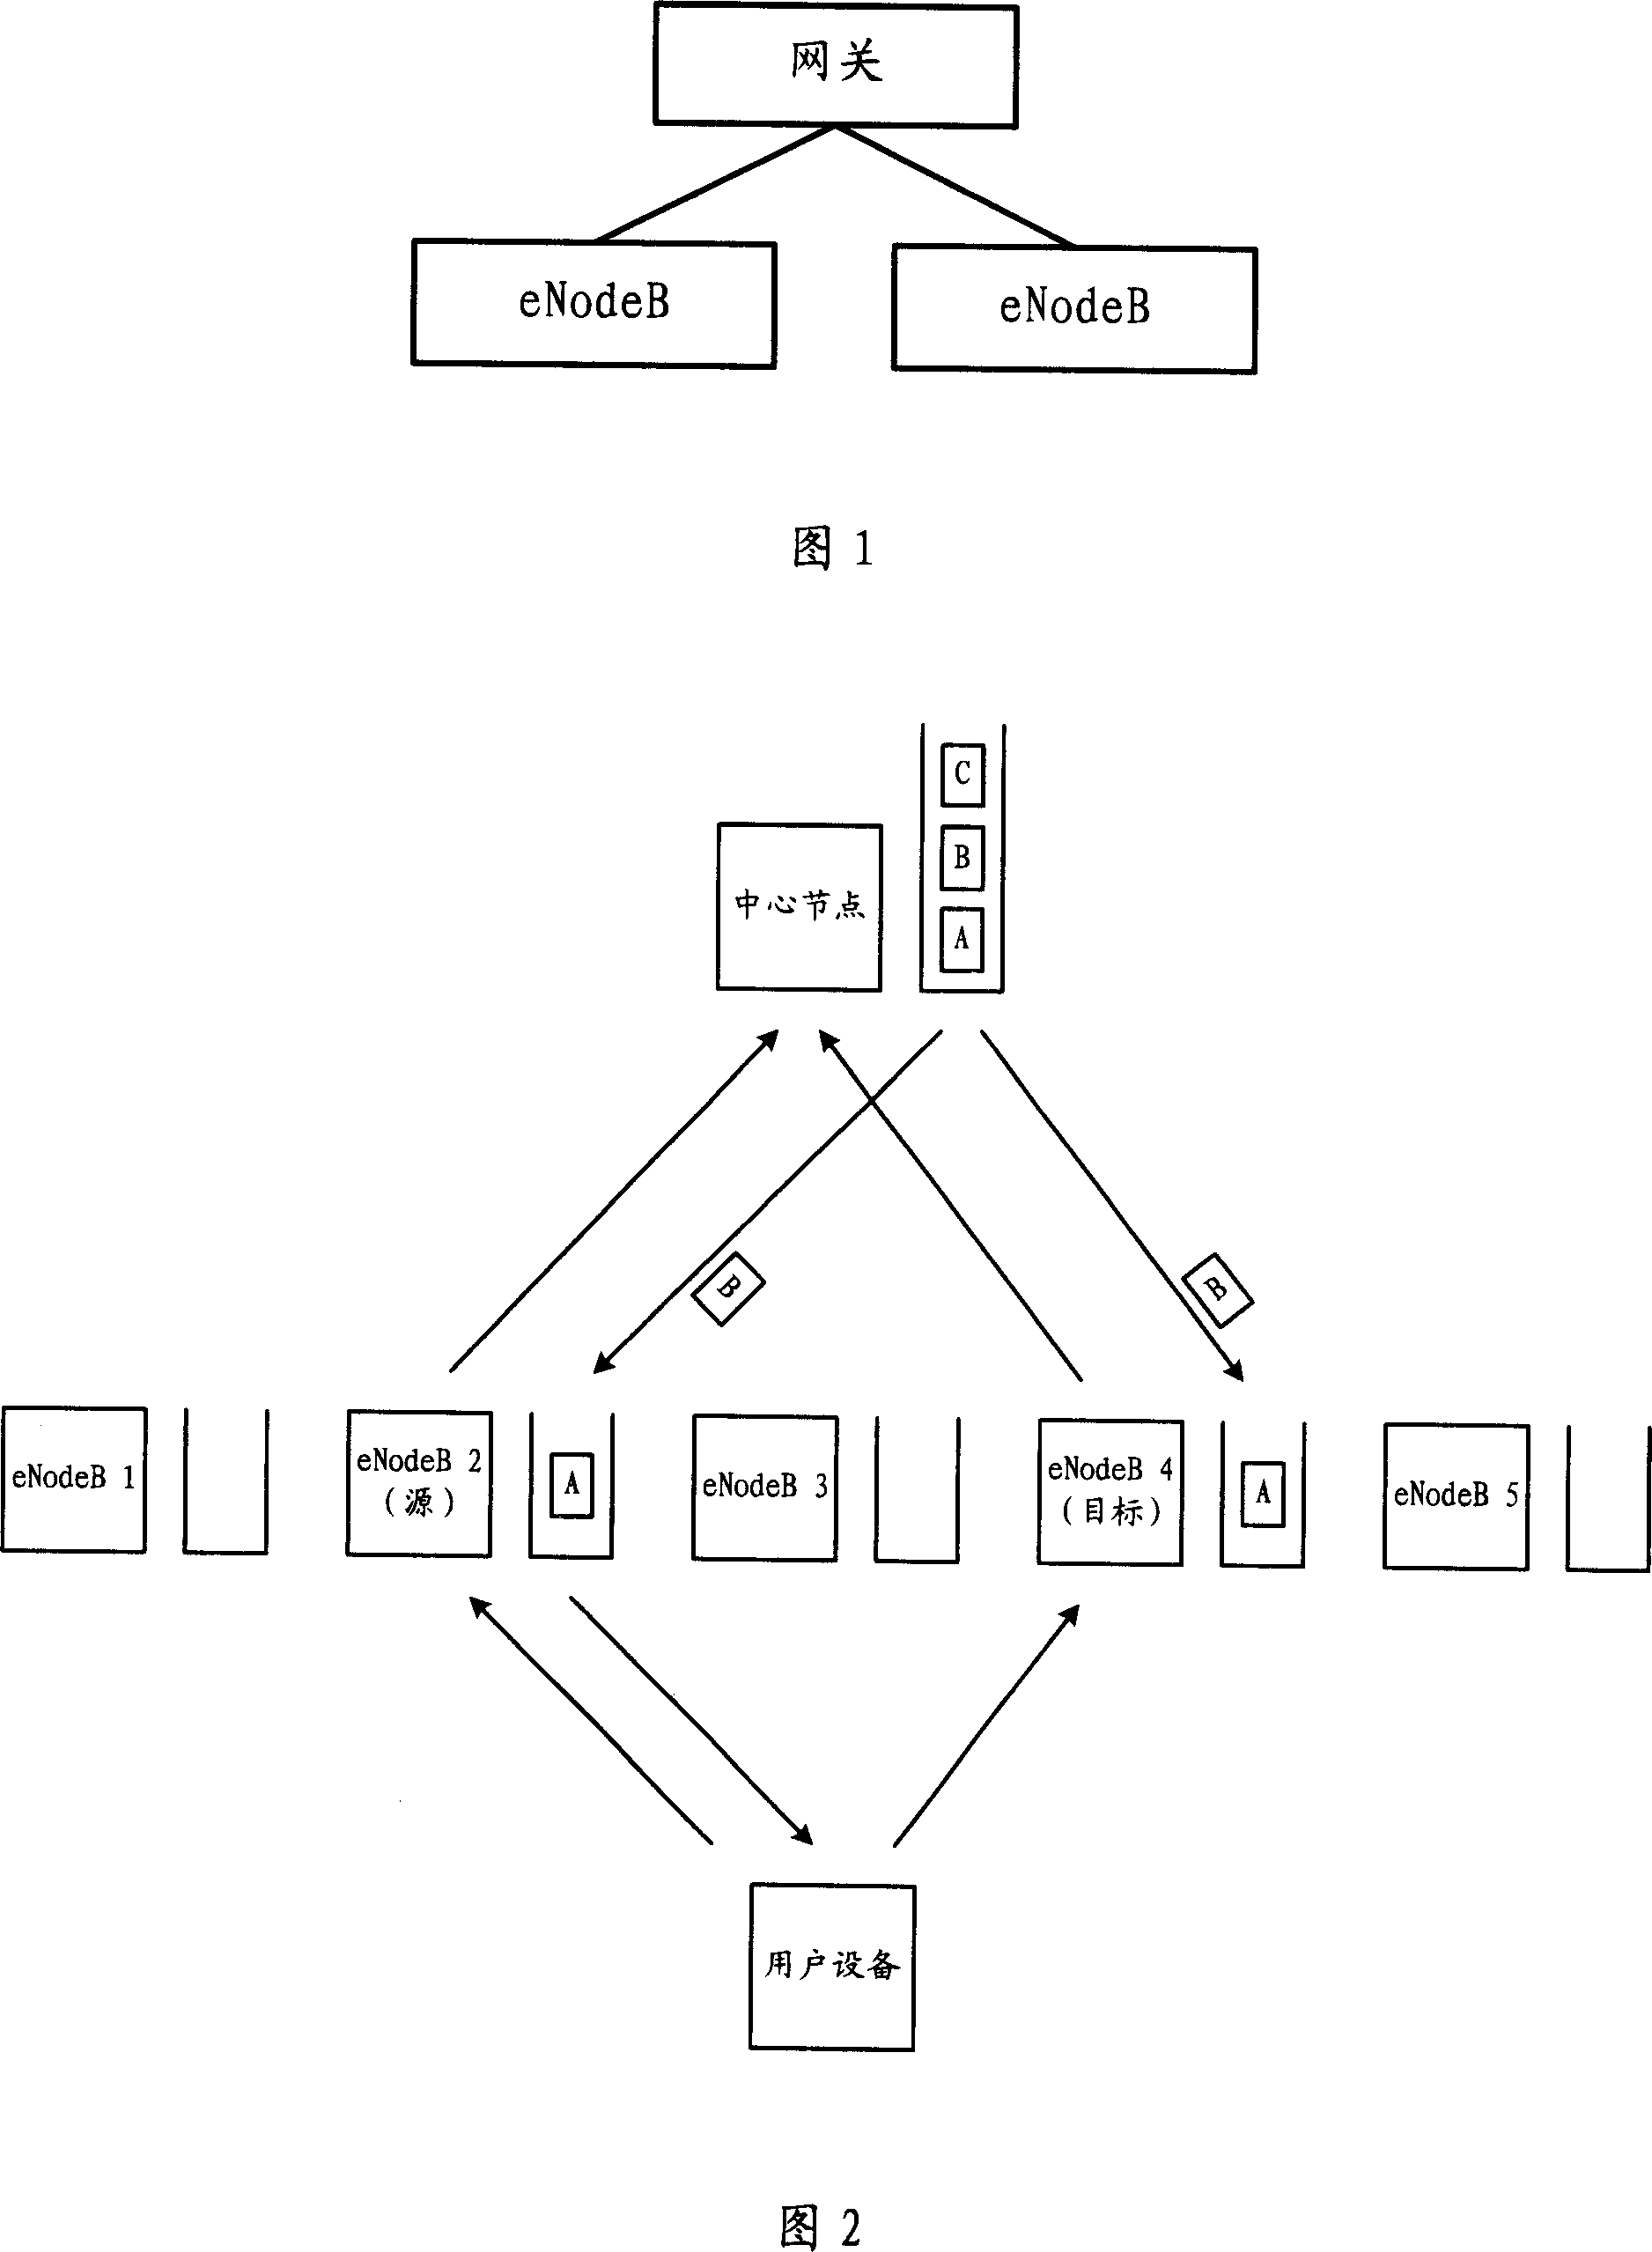 Method for user device switching in the long evolving network